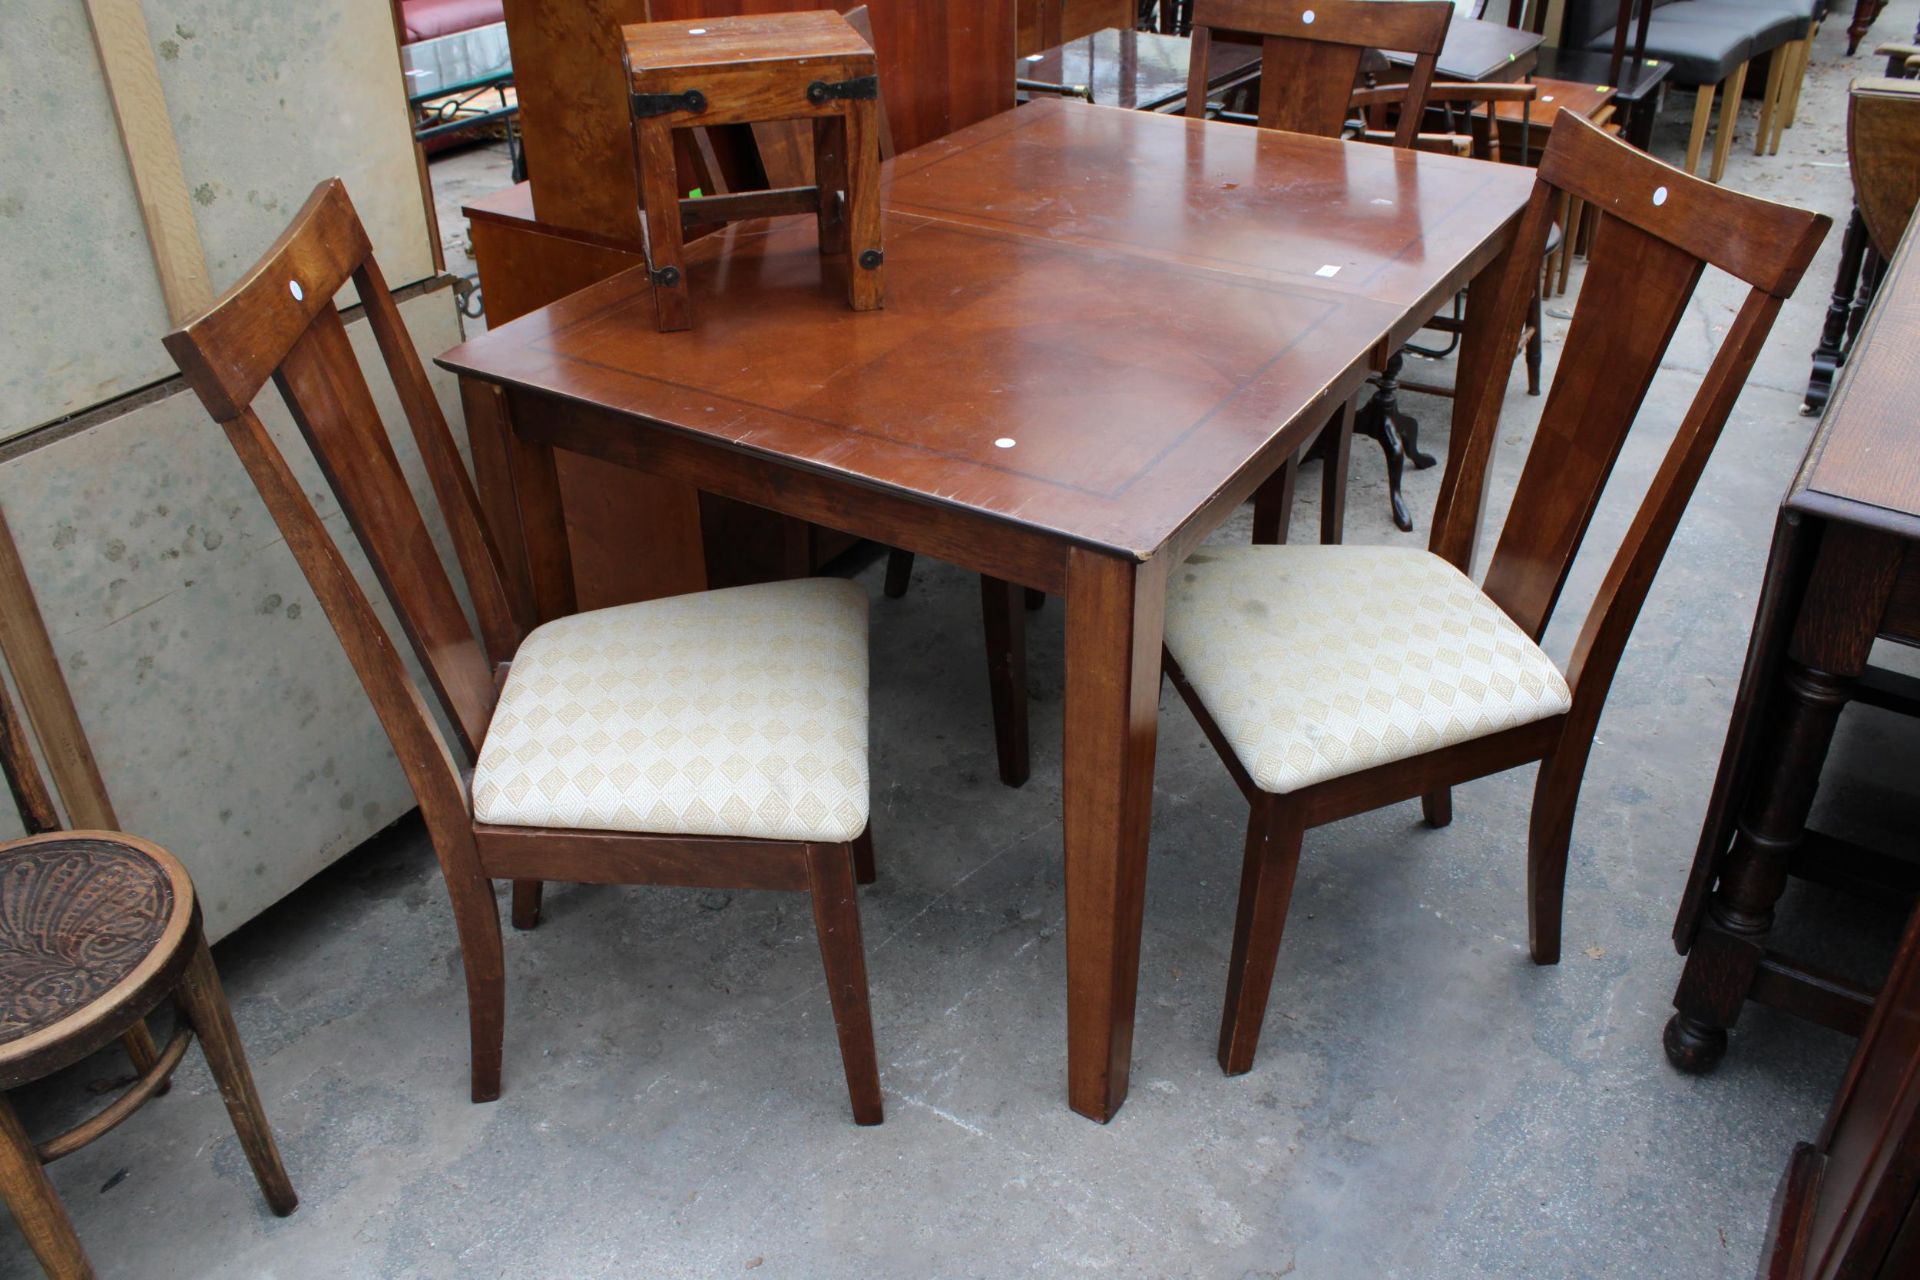 A HARDWOOD DINING TABLE 54" X 36" , FOUR DINING CHAIRS AND A HARDWOOD FOOTSTOOL - Image 2 of 3